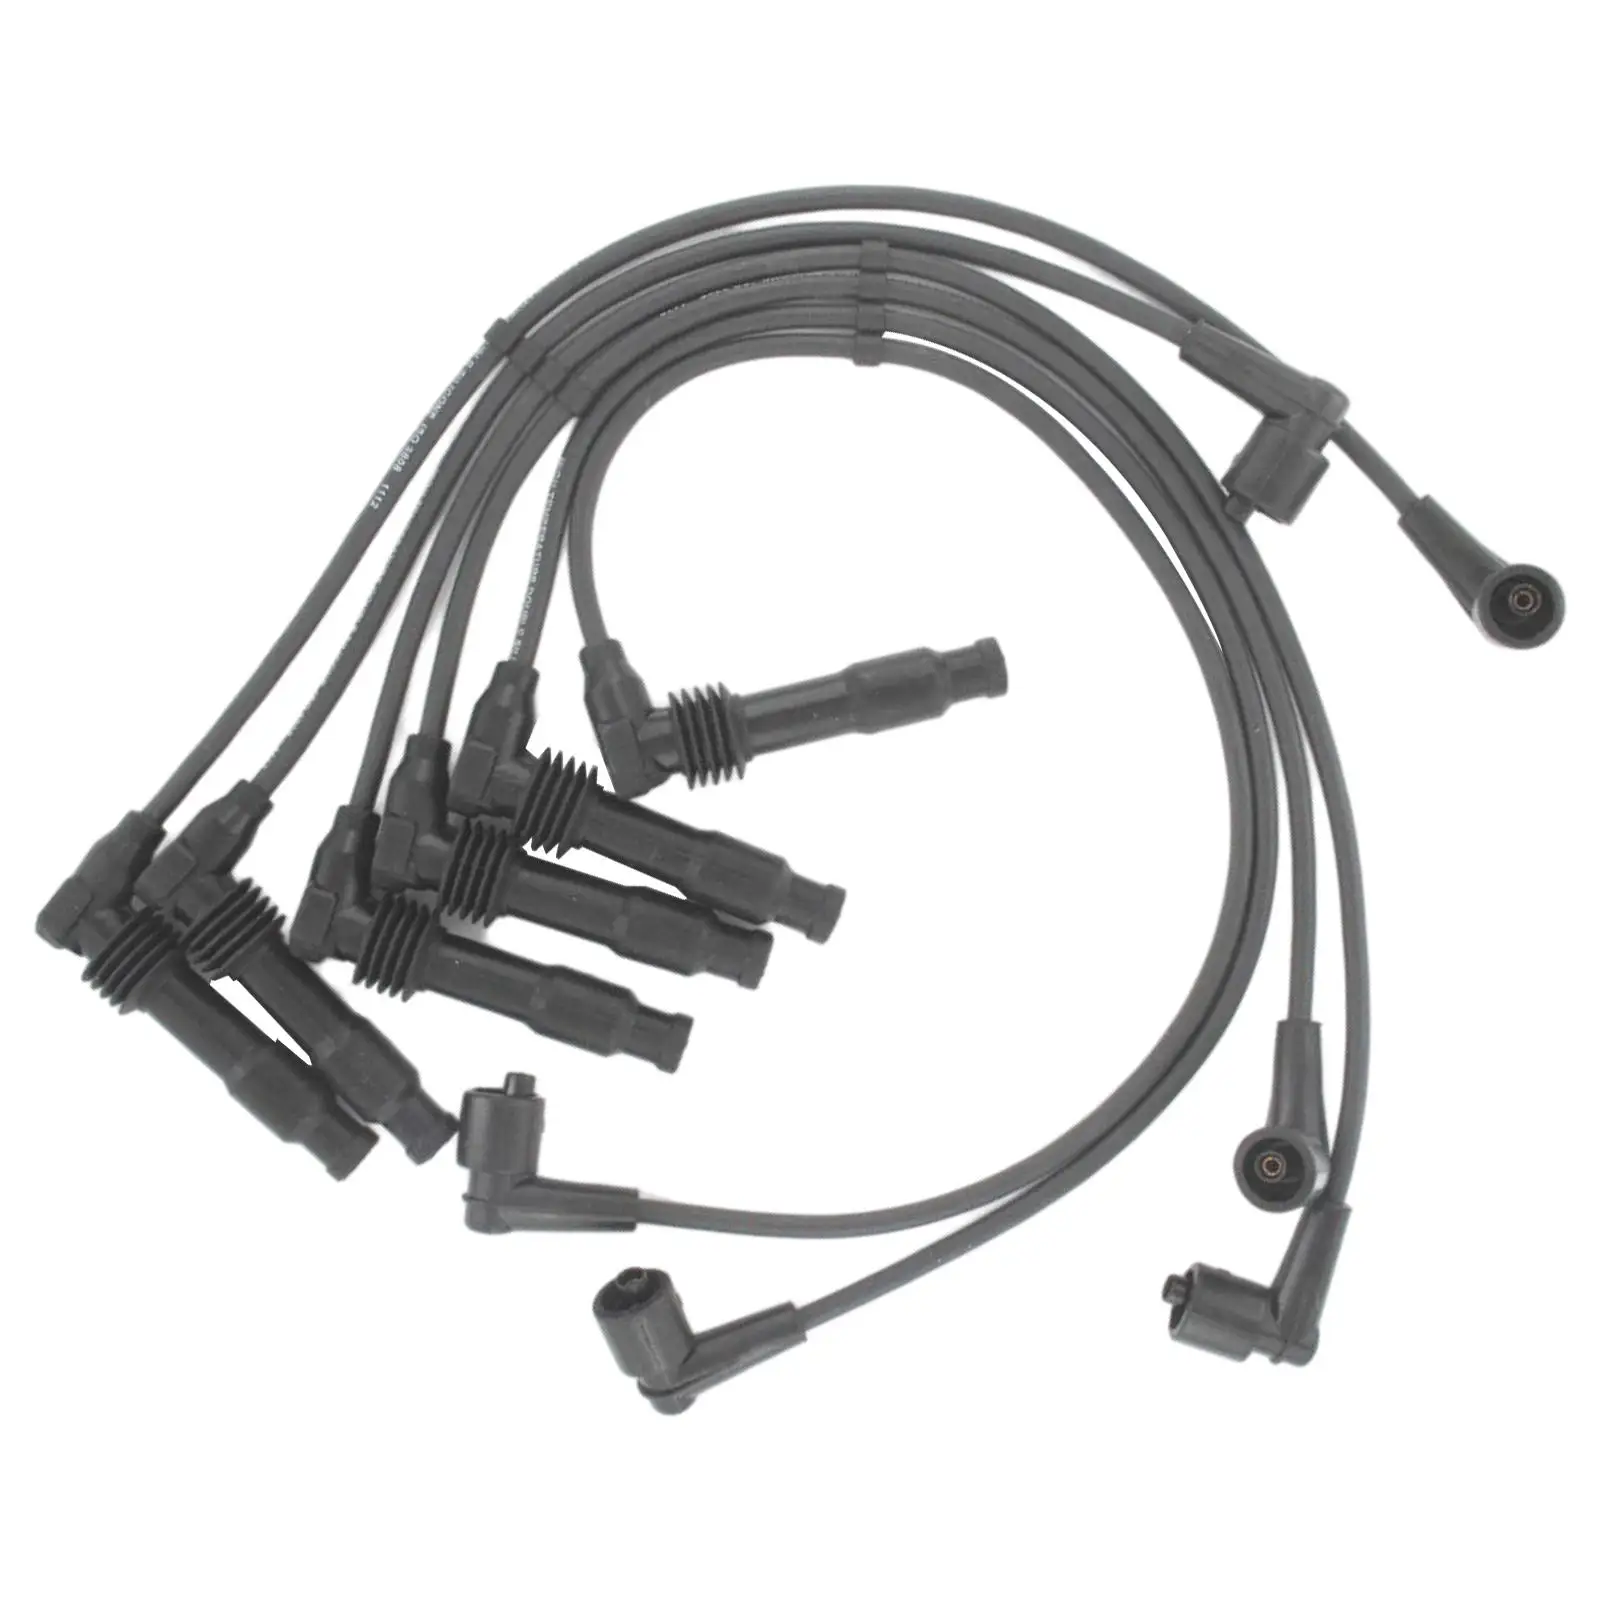 Ignition Spark Plug Cable Wire Set 53-0159 1612605 90 507 989 90 510 379 0986357055 1612622 Fit for Opel Vectra B 2.5 V6 95-00